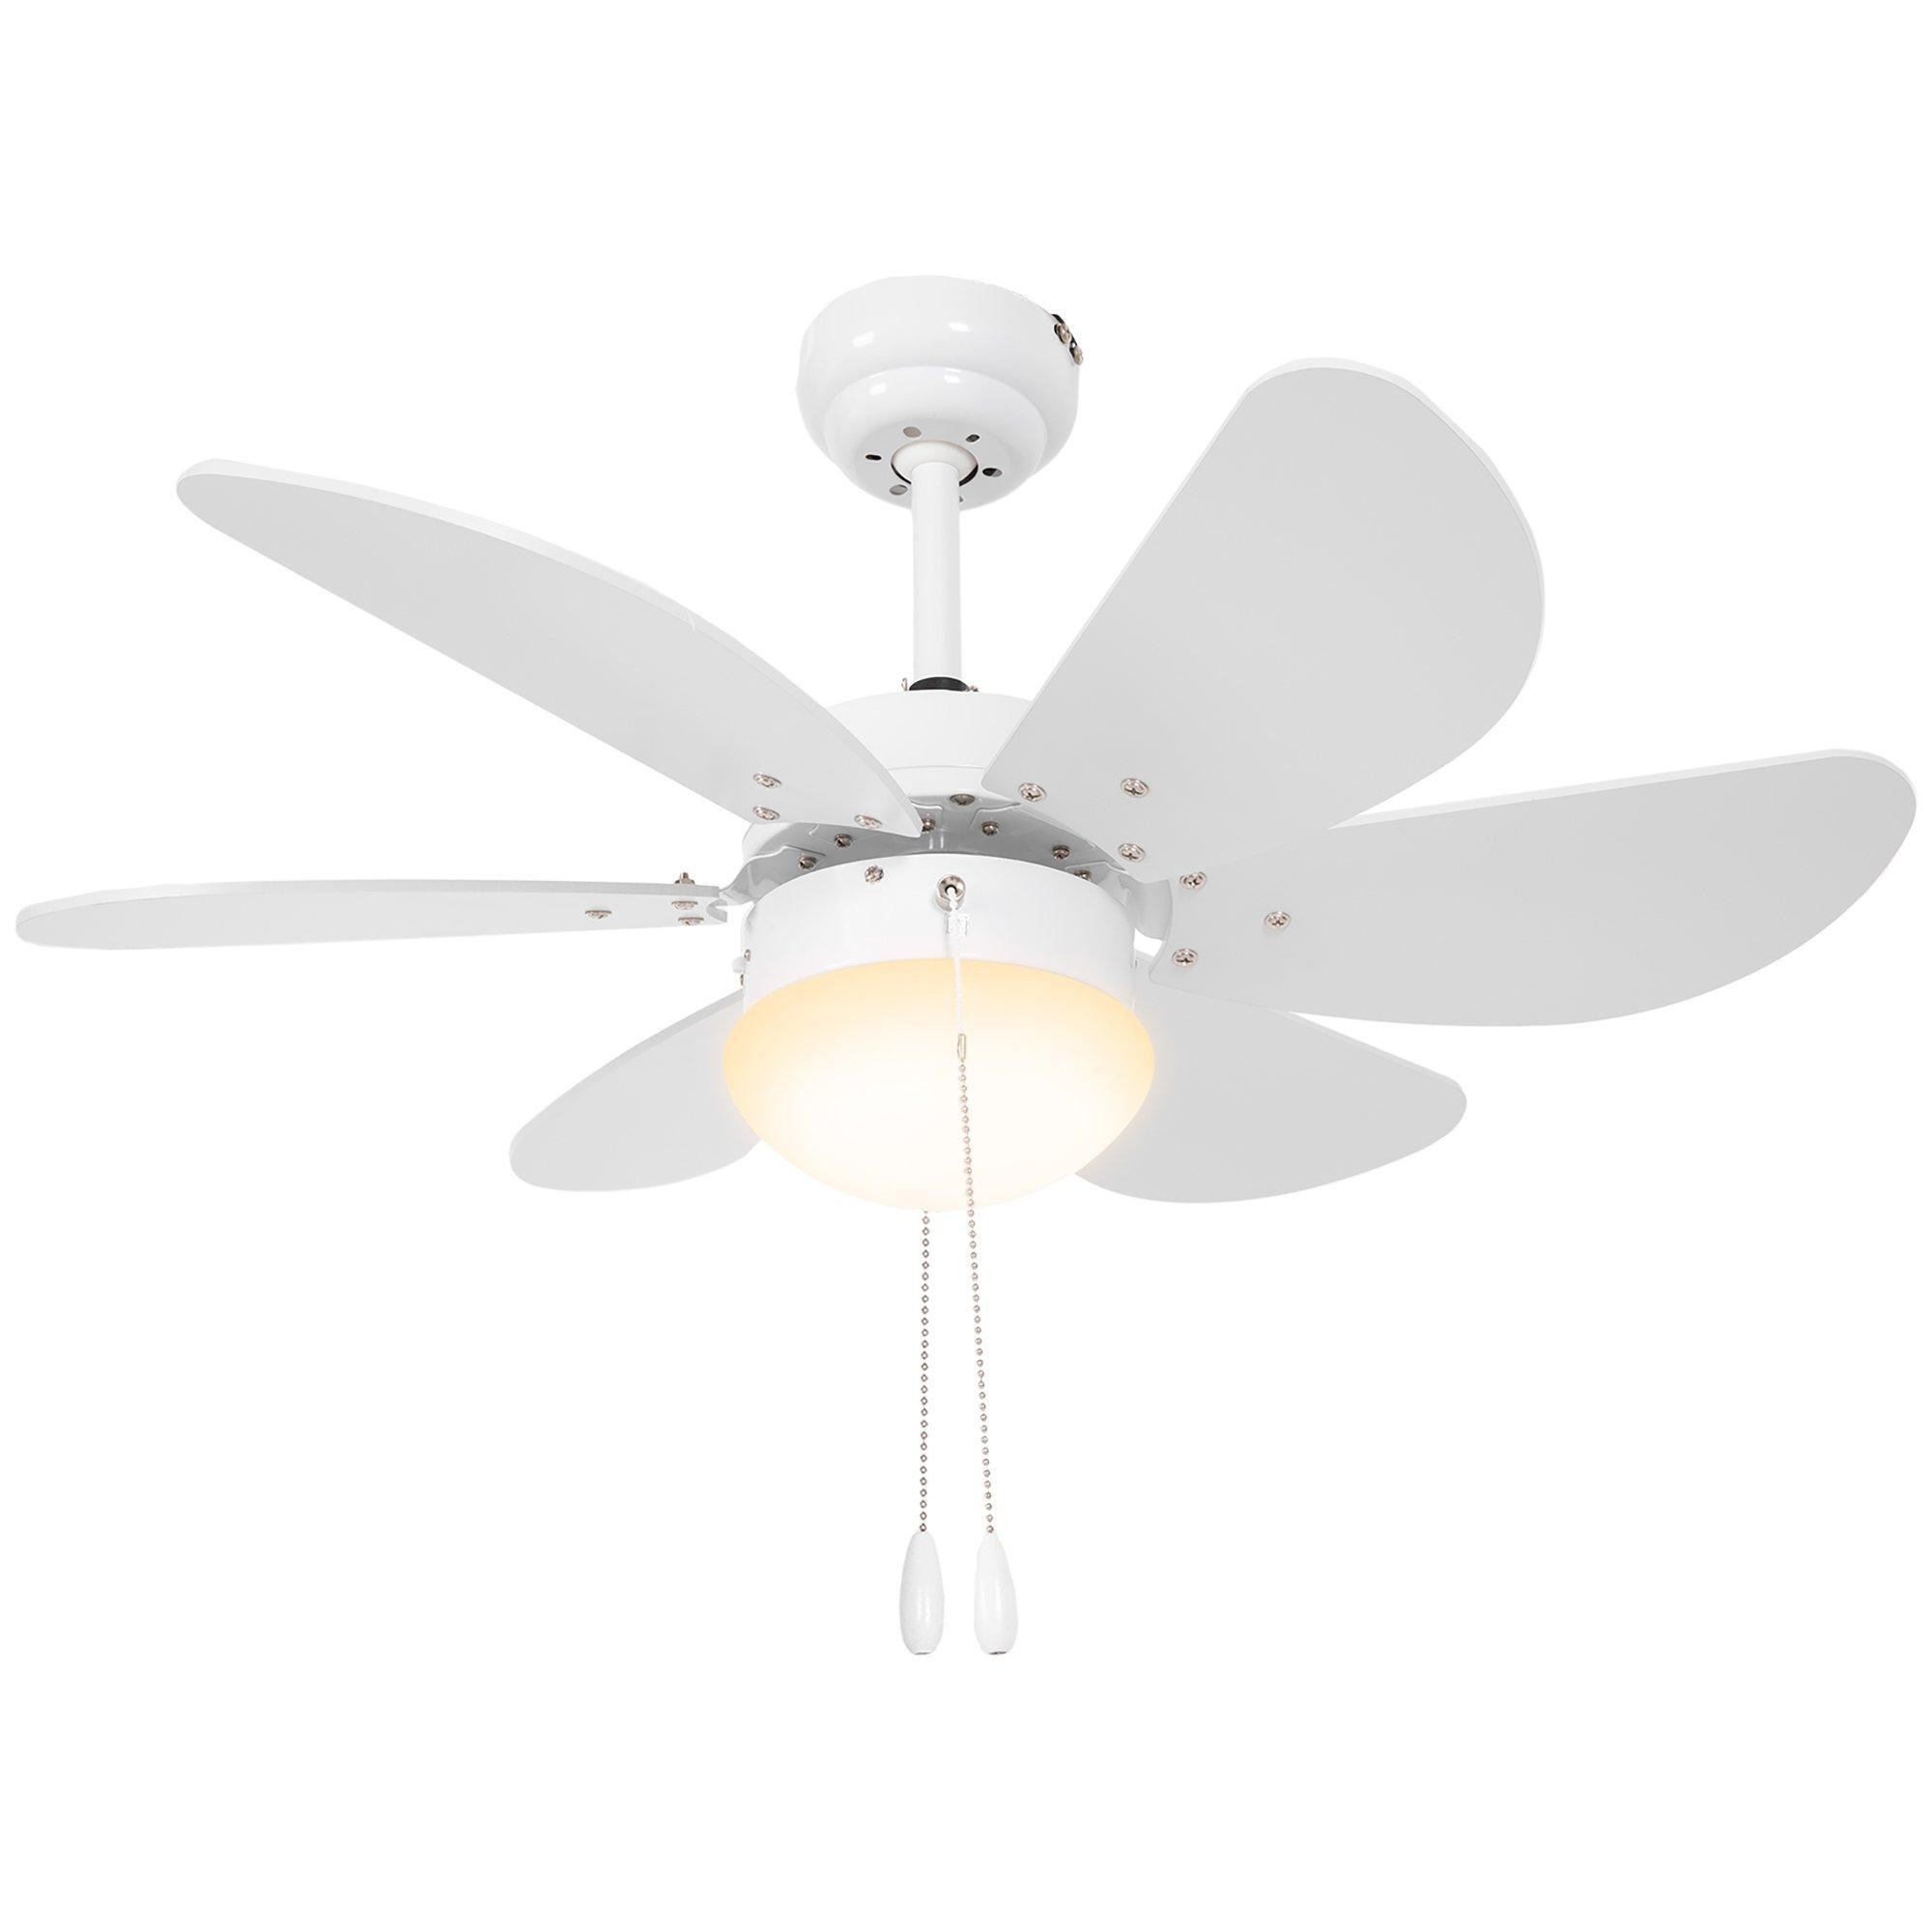 Ceiling Fan wit Light Reversible Airflow 6 Blades Wall Mounting - image 1